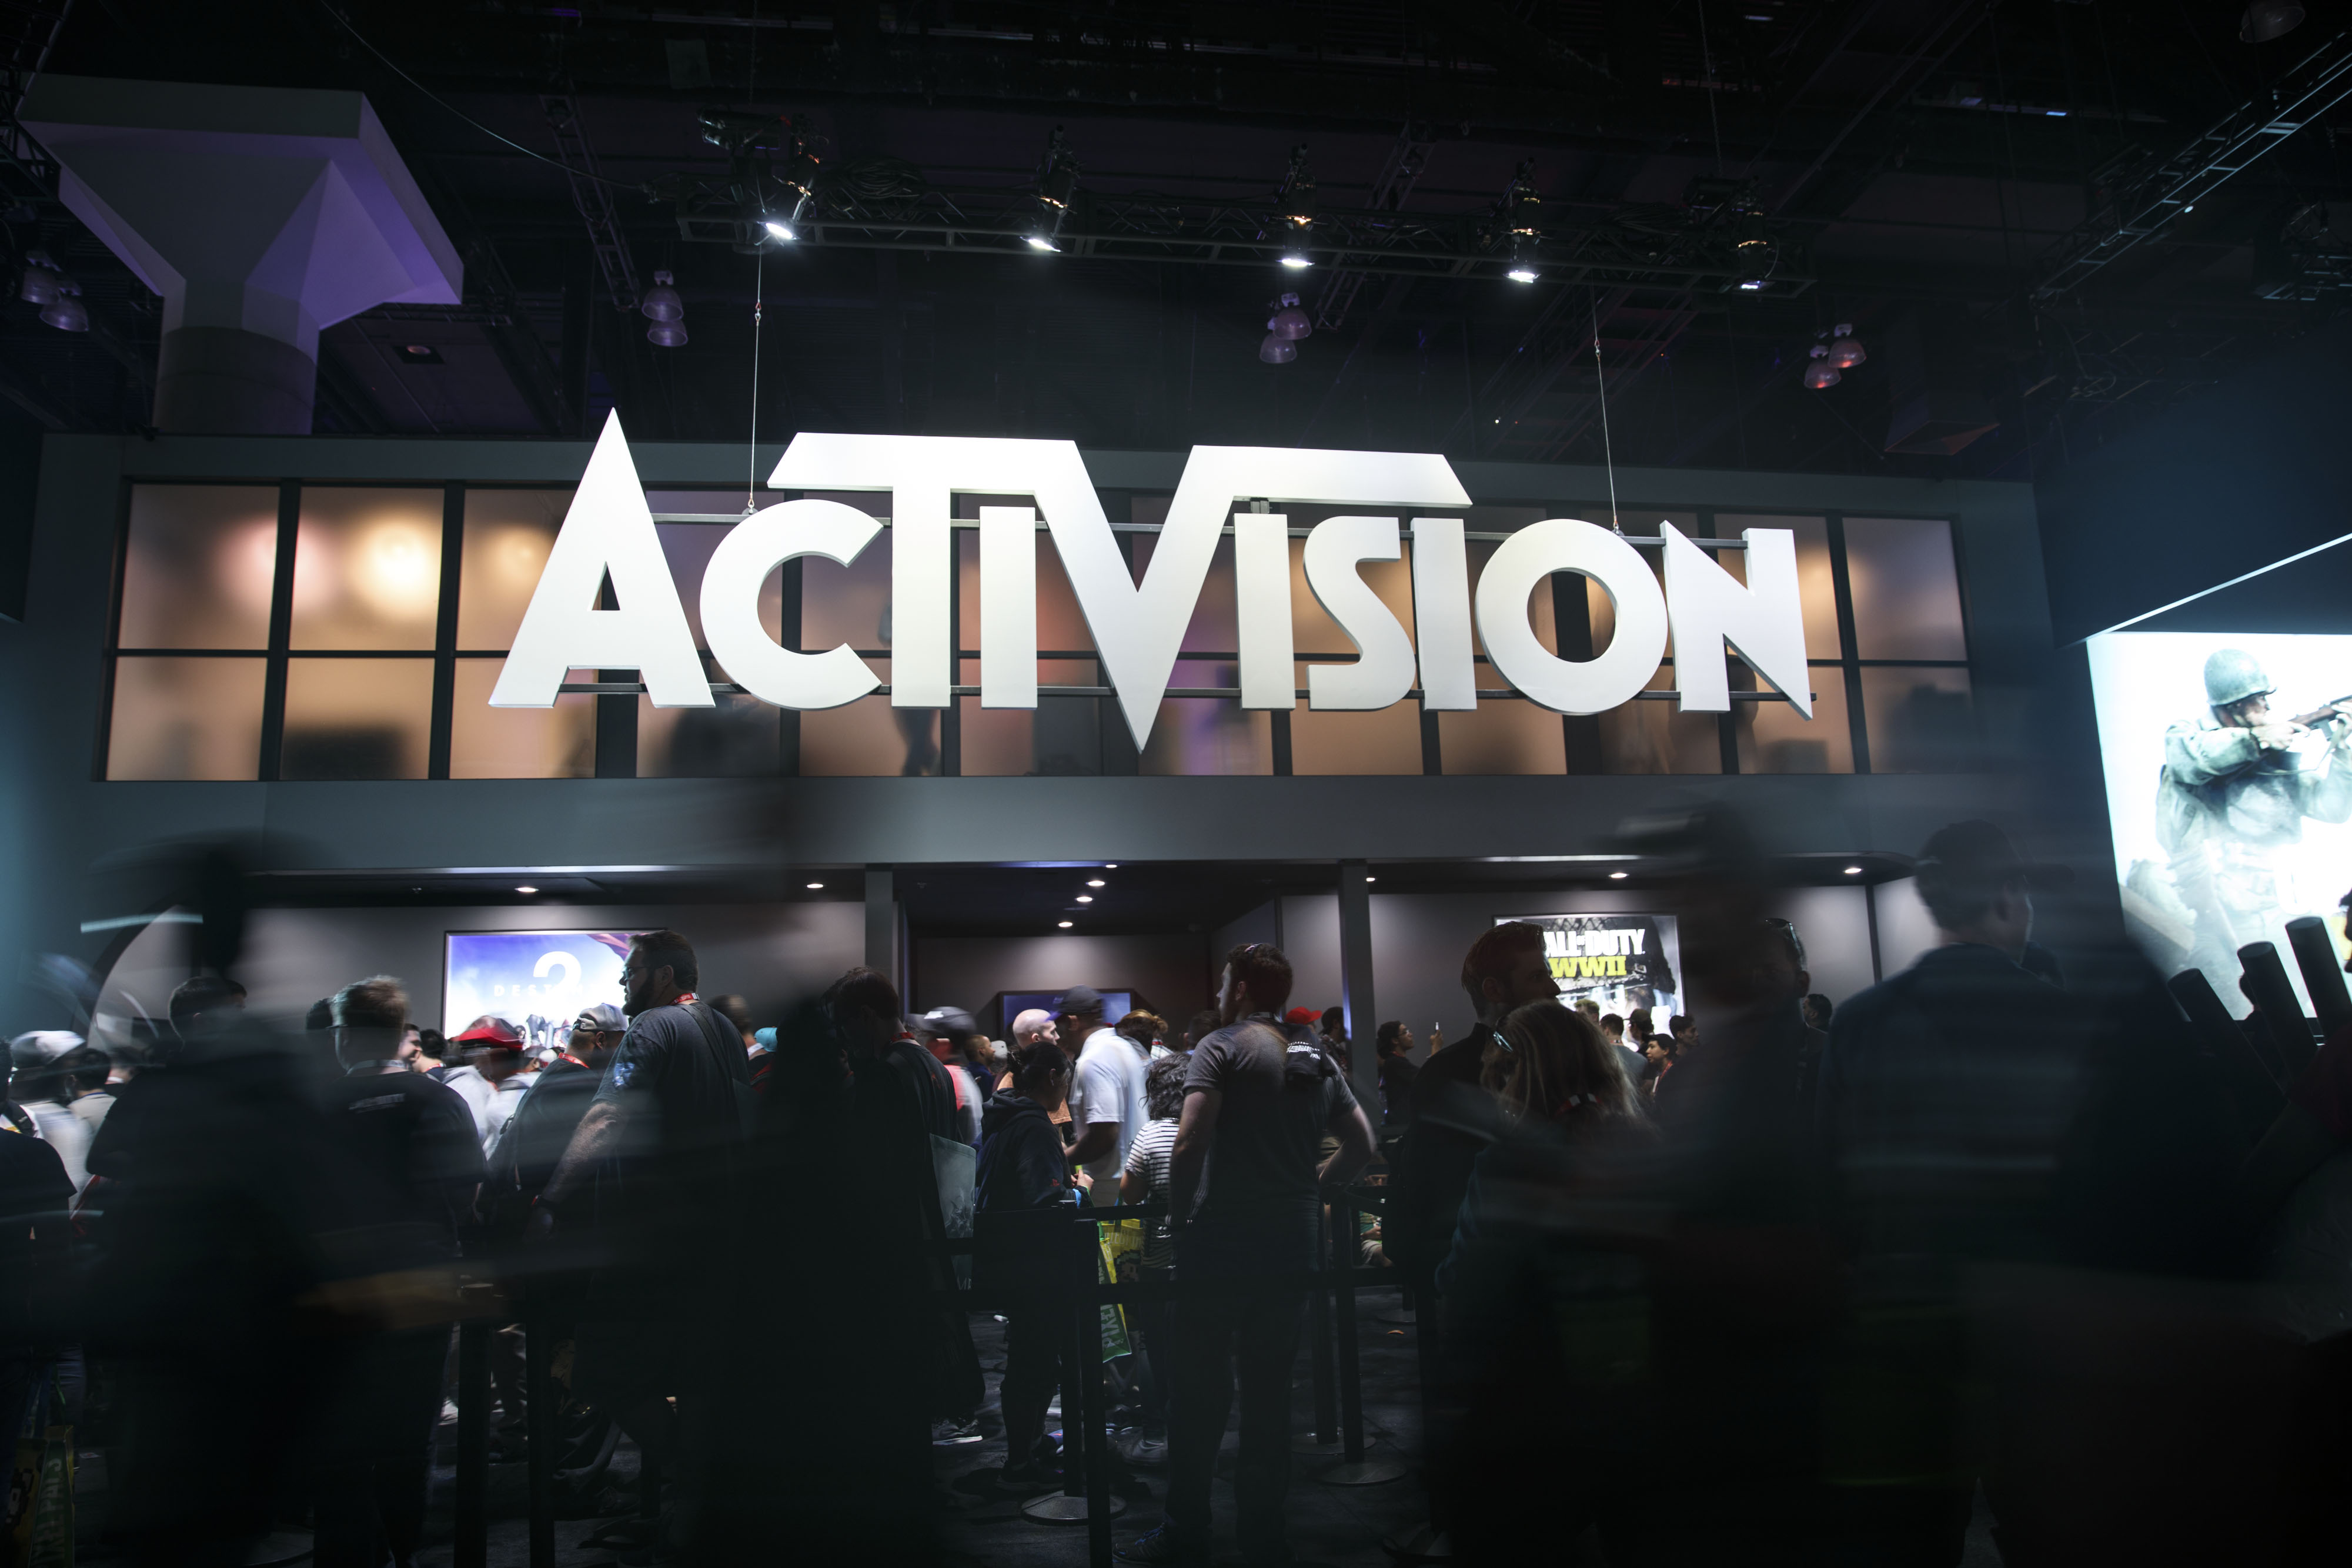 BREAKING: Microsoft now owns Activision Blizzard - the deal is